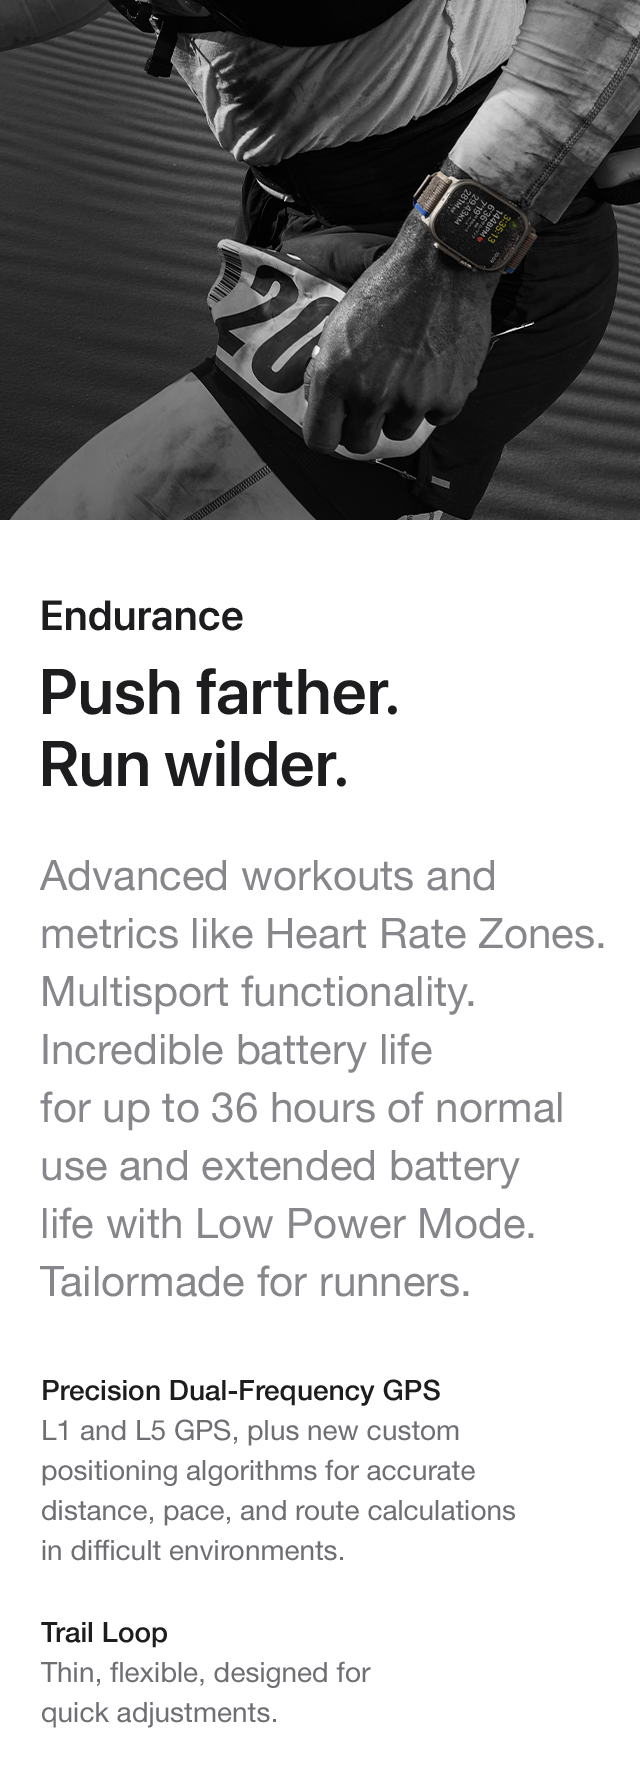 Endurance Push farther. Run wilder. Advanced workouts and metrics like Heart Rate Zones. Multisport functionality. Incredible battery life for up to 36 hours of normal use and extended battery life with Low Power Mode. Tailormade for runners. Precision Dual-Frequency GPS L1 and L5 GPS, plus new custom positioning algorithms for accurate distance, pace, and route calculations in difficult environments. Trail Loop Thin, flexible, designed for quick adjustments.